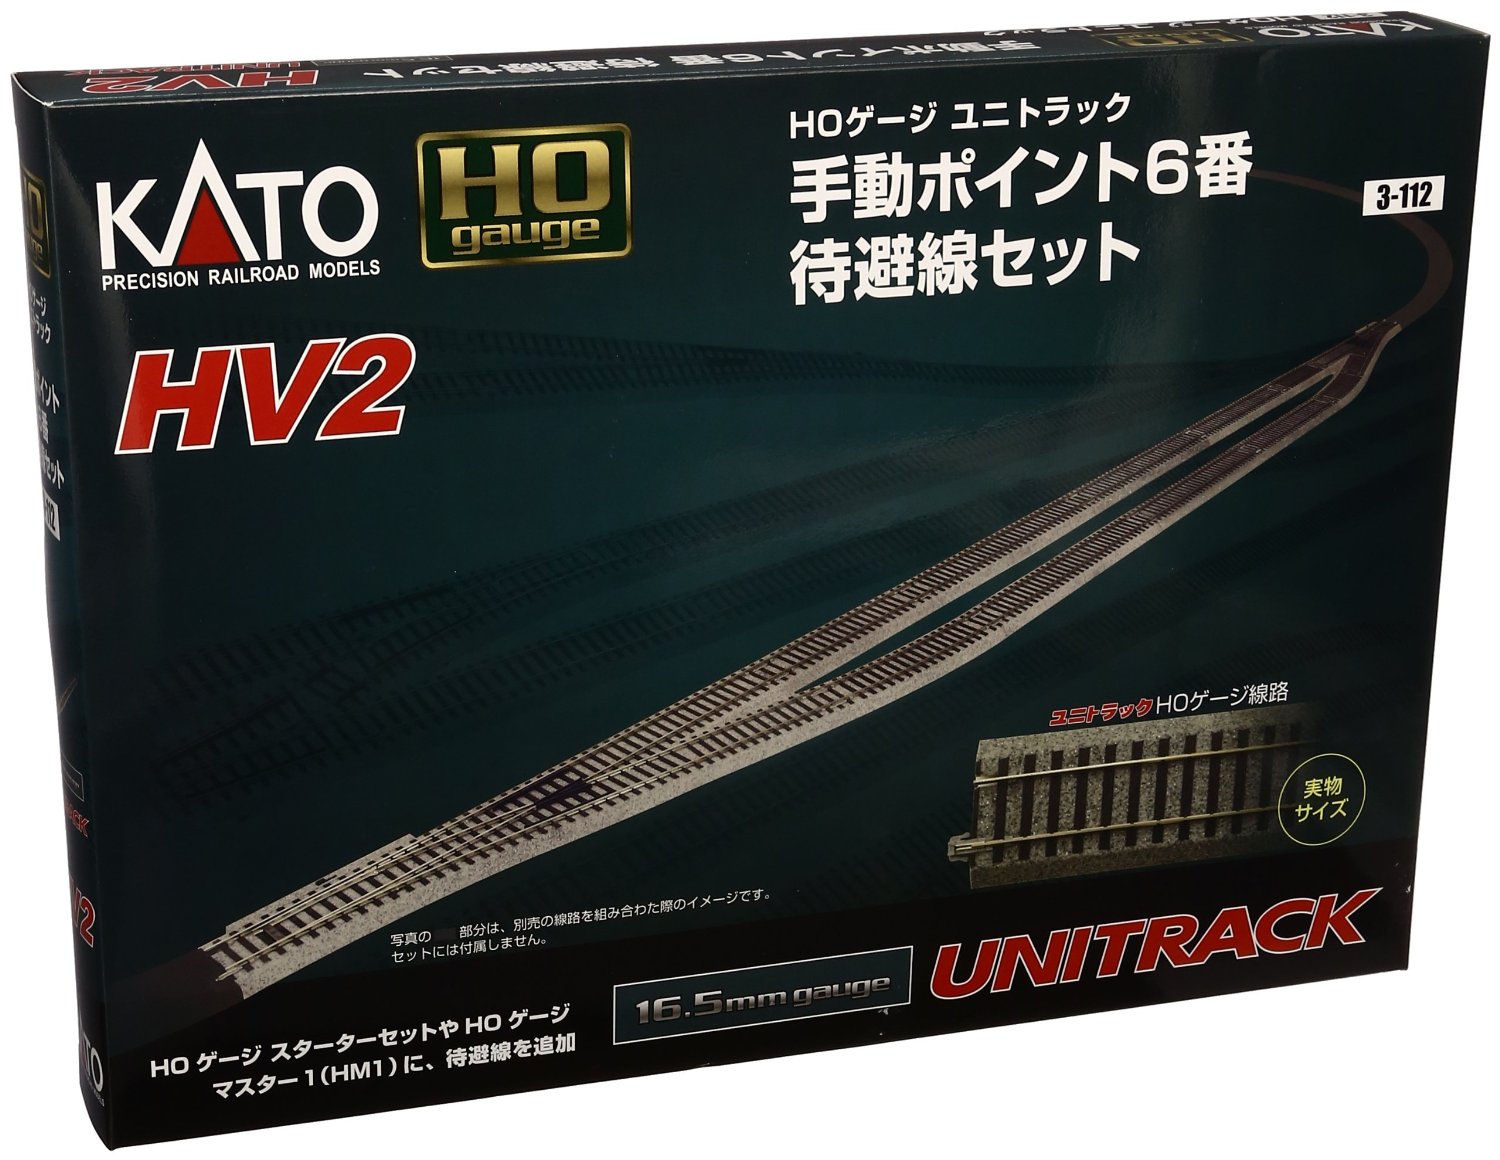 3-112 Unitrack HV2 Passing Track Set with Manual Point #6 (H